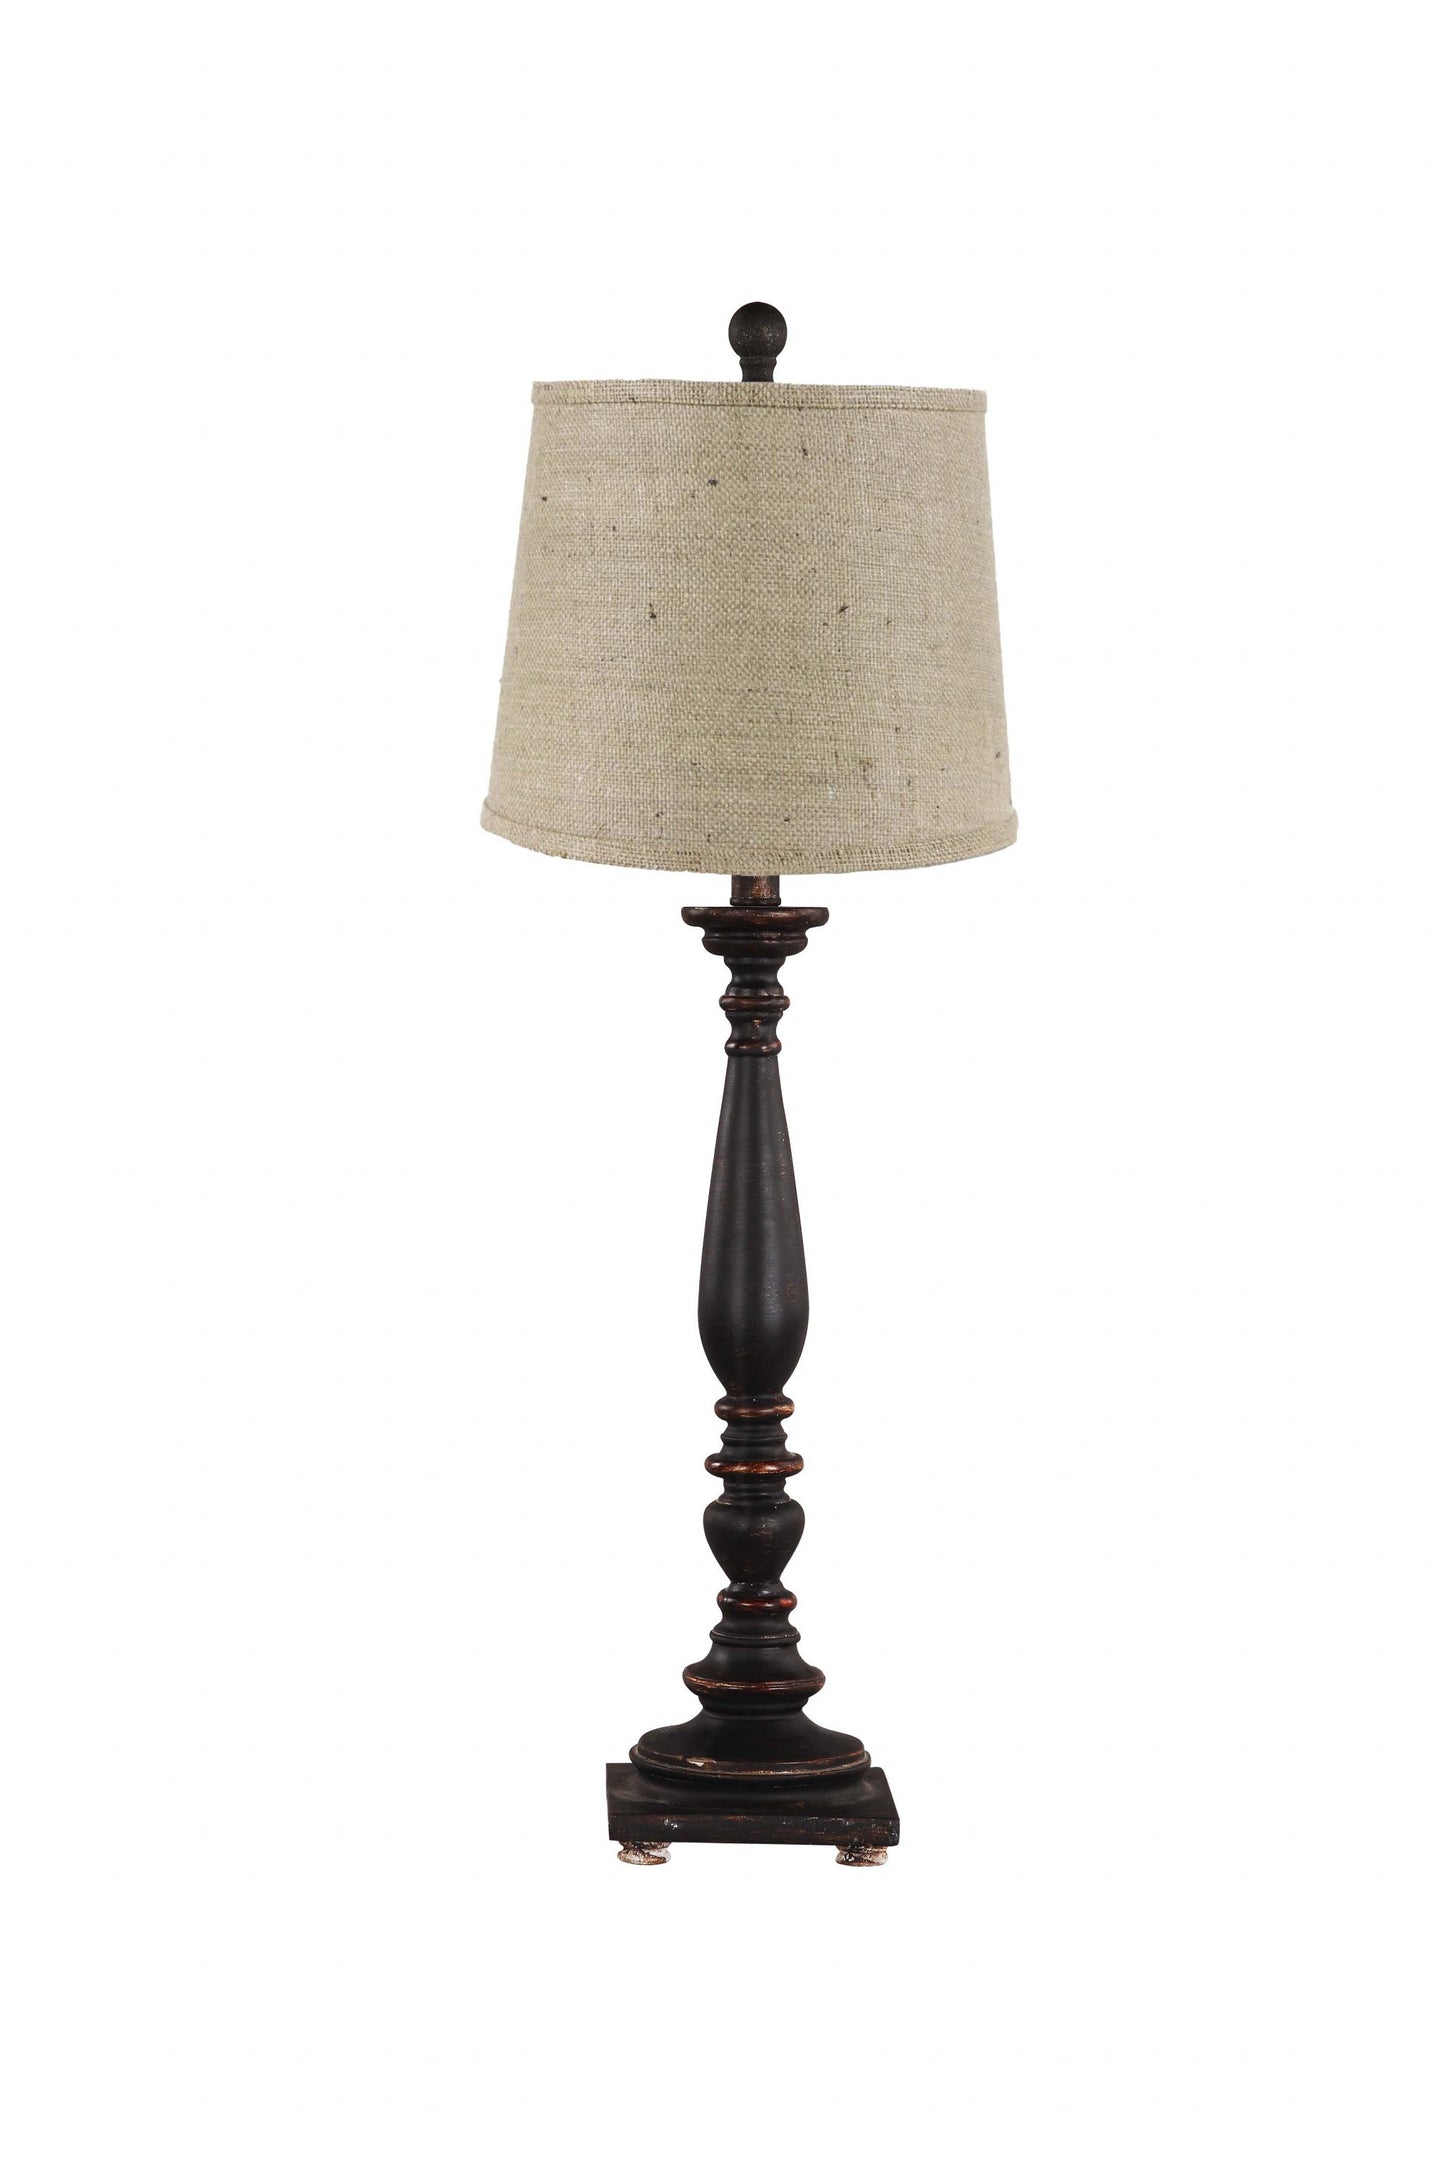 Distressed Black Traditional Table Lamp With Natural Burlap Fabric Shade